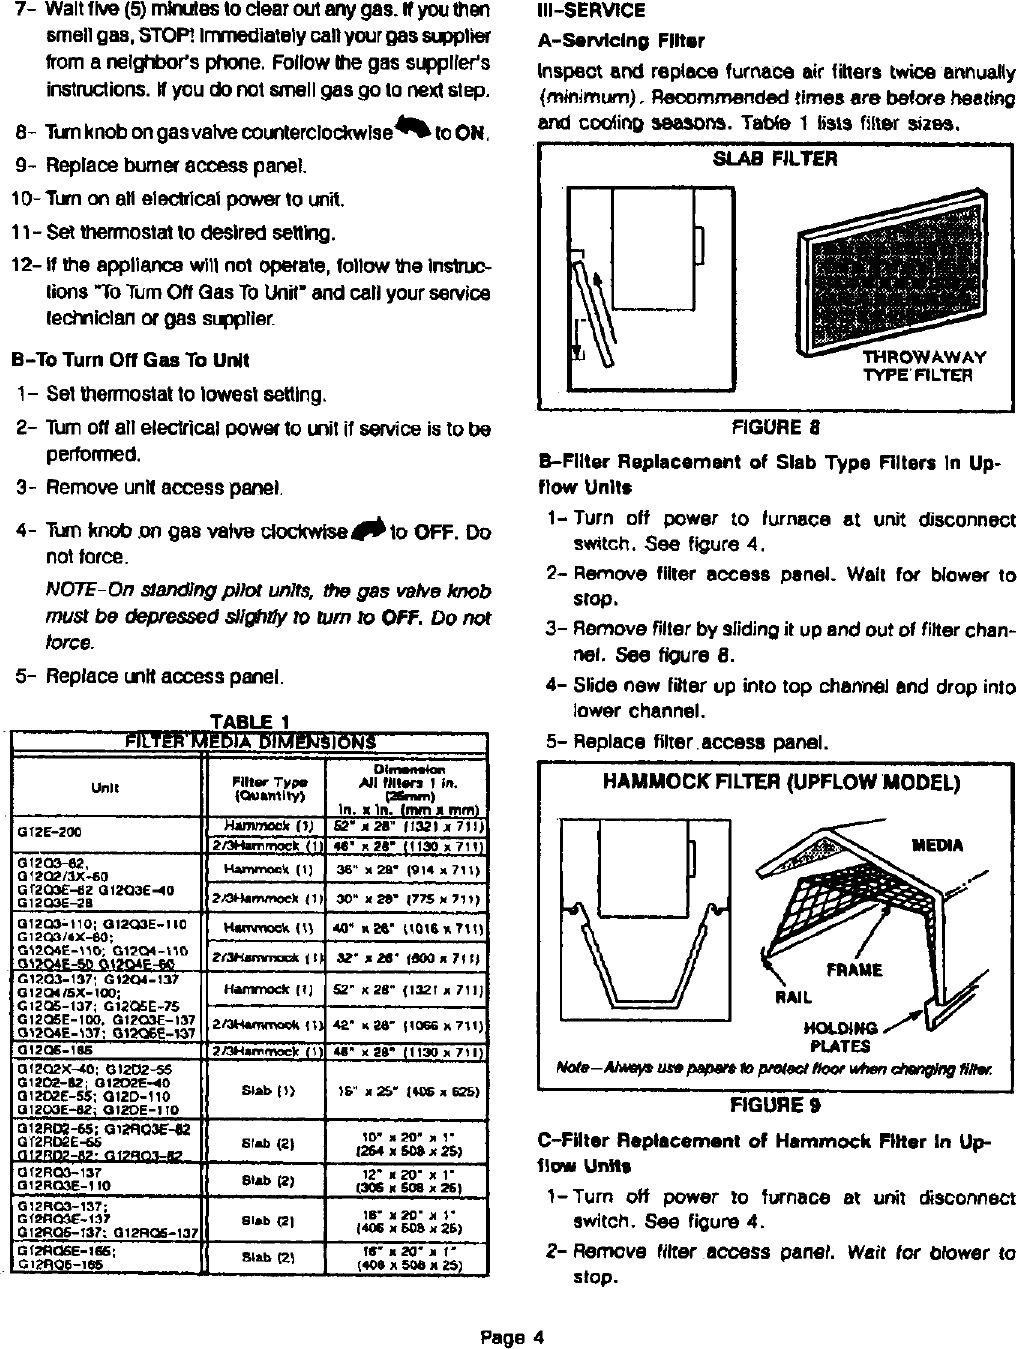 Page 5 of 8 - LENNOX  Furnace/Heater, Gas Manual L0403509